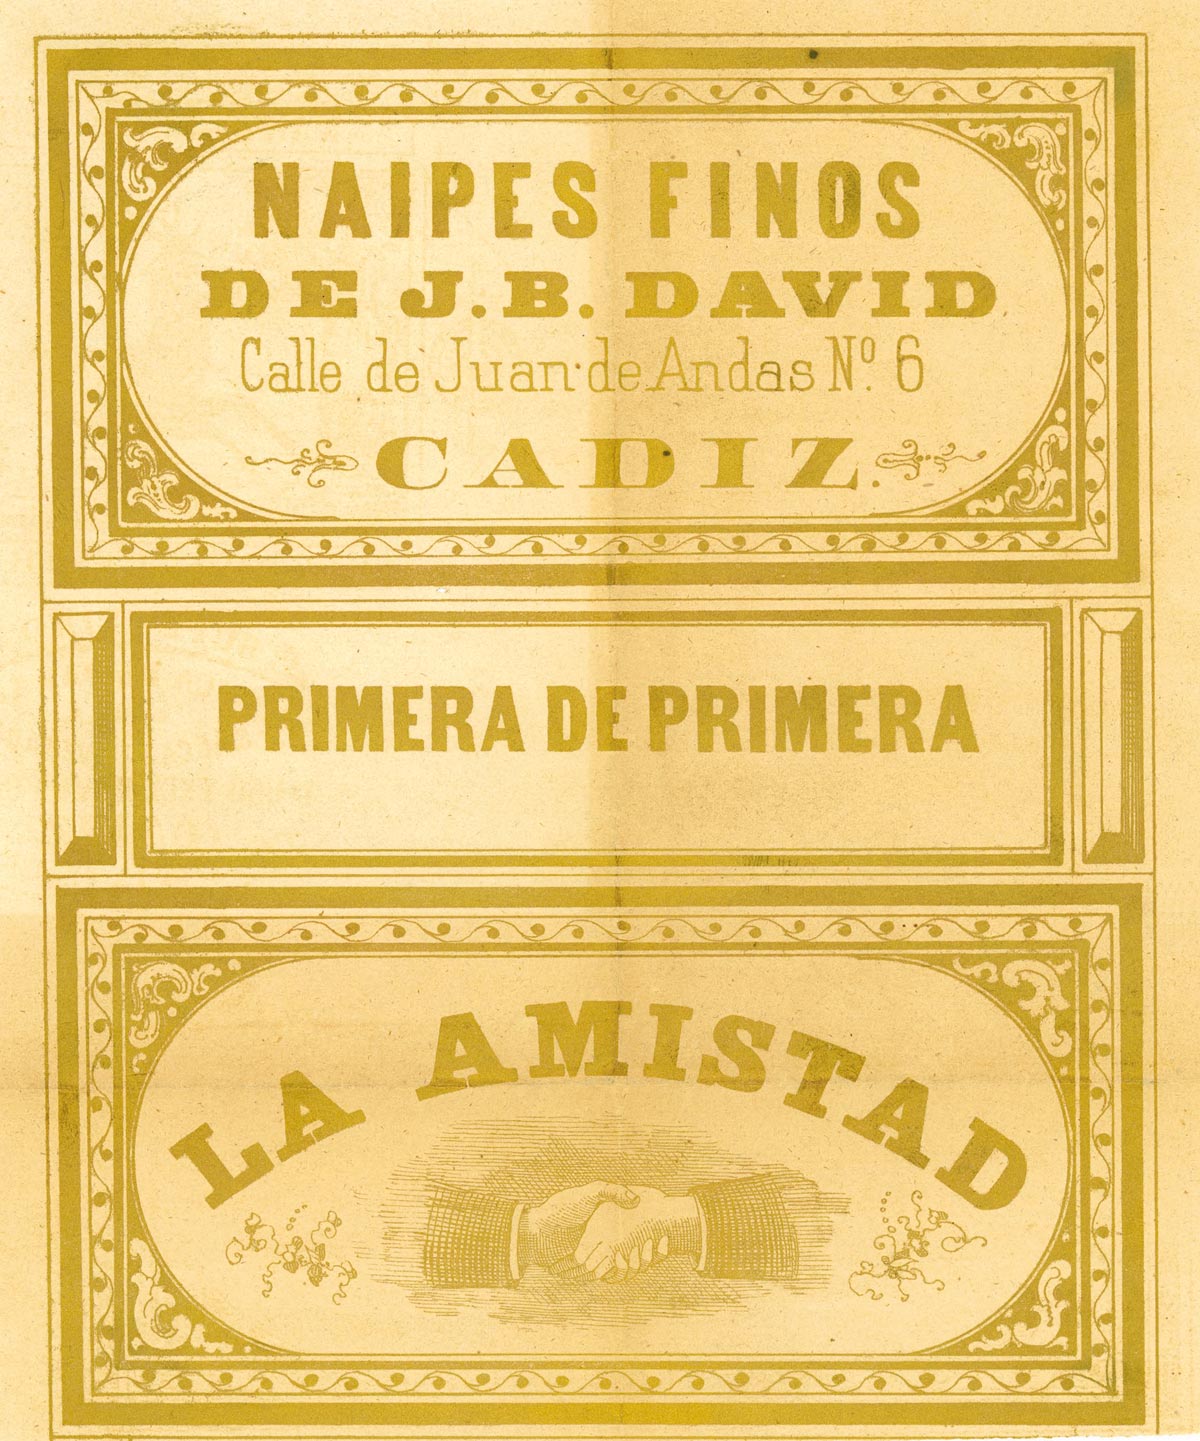 Wrapper from “La Amistad” deck produced by Wüst for J. B. David in Cadiz, Spain, c.1880